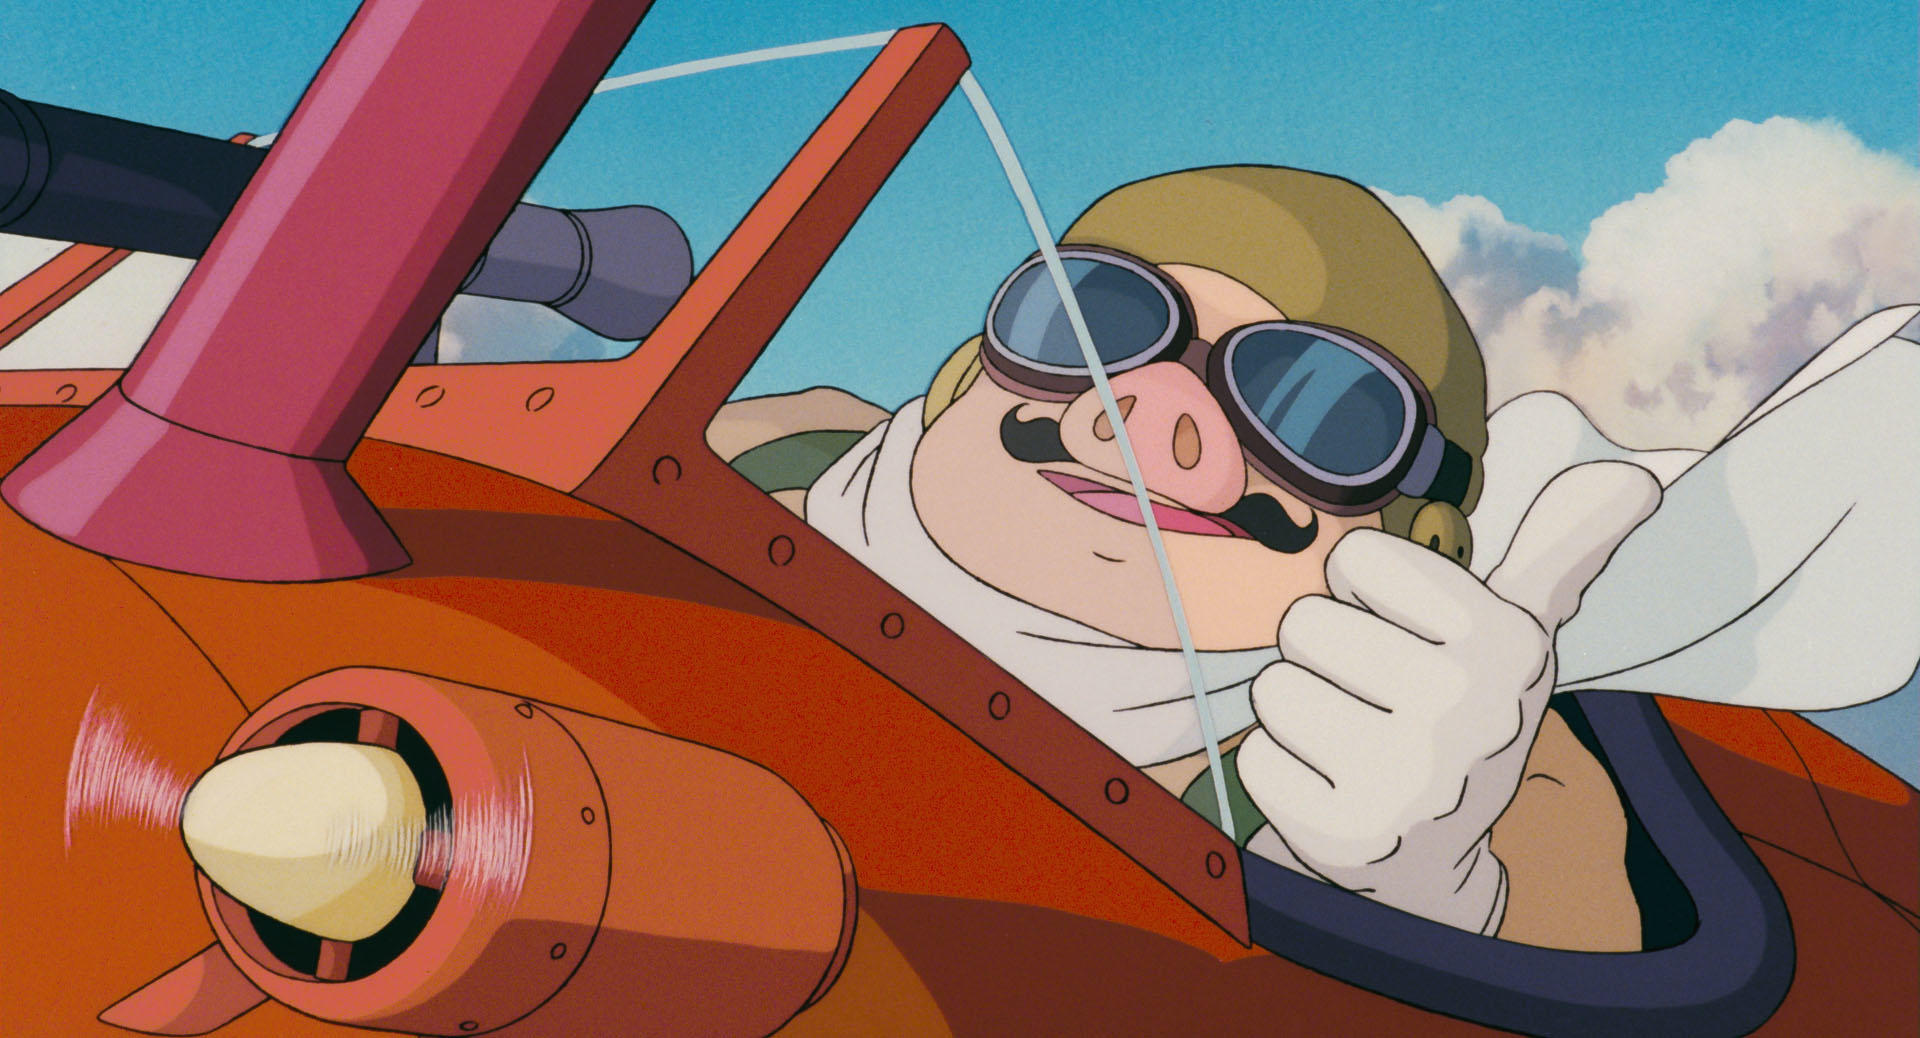 Studio Ghibli’s Porco Rosso: Behind-the-scenes trivia and secret Easter eggs revealed